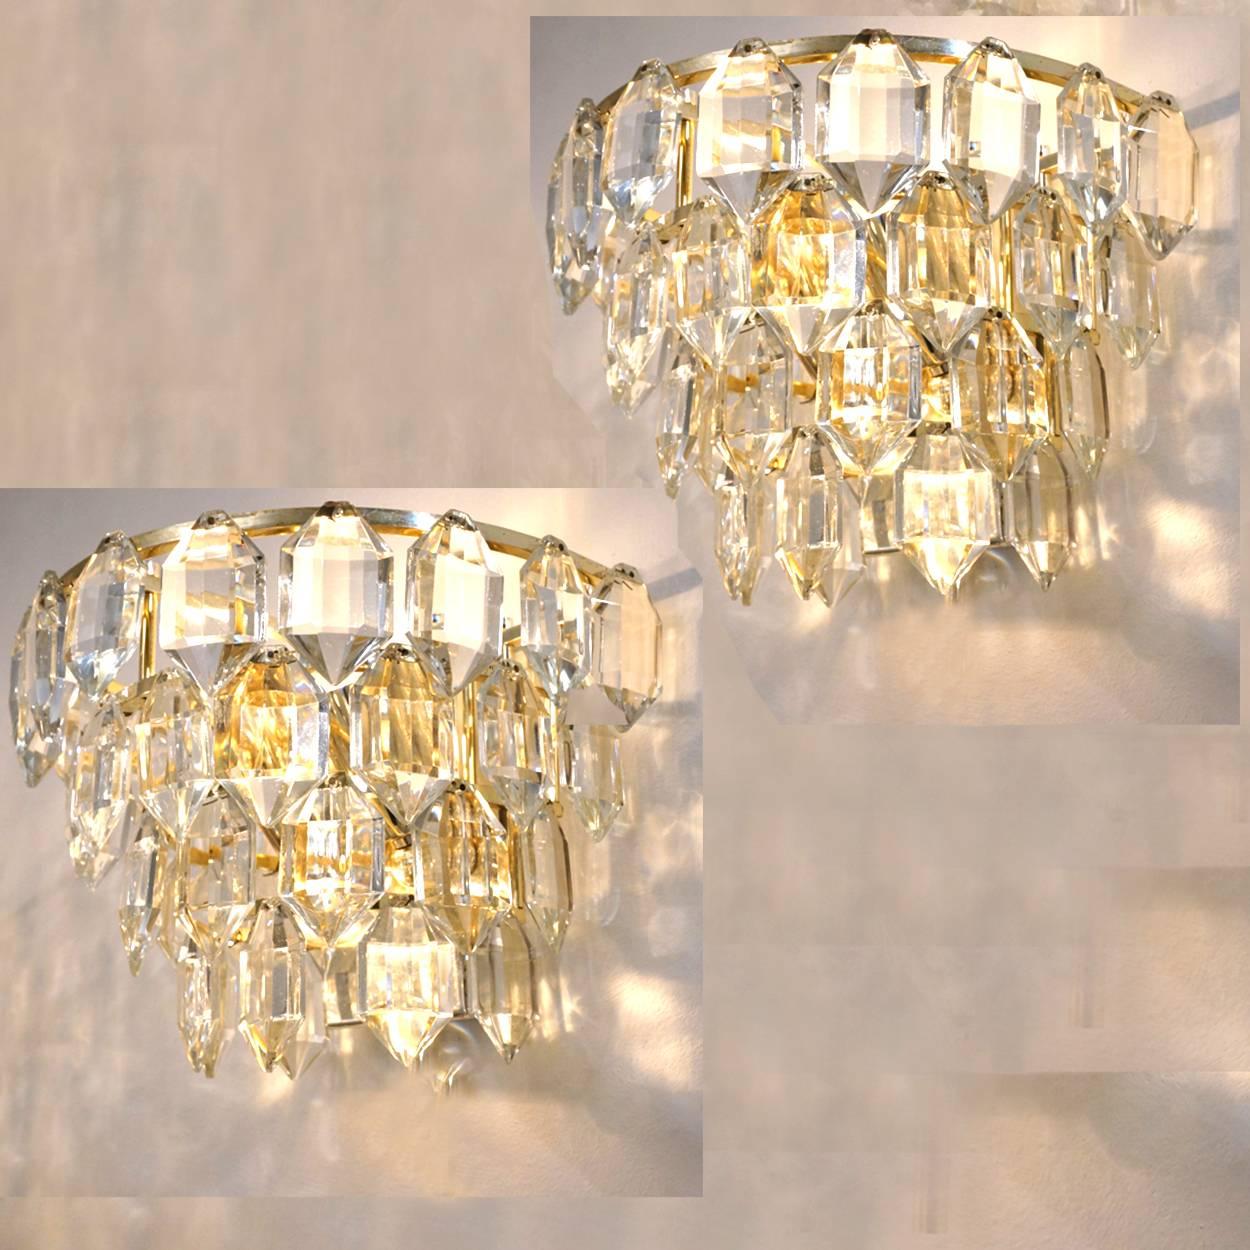 Set of Four Bakalowits Light Fixtures, Brass and Crystal Glass, Austria, 1960s For Sale 3